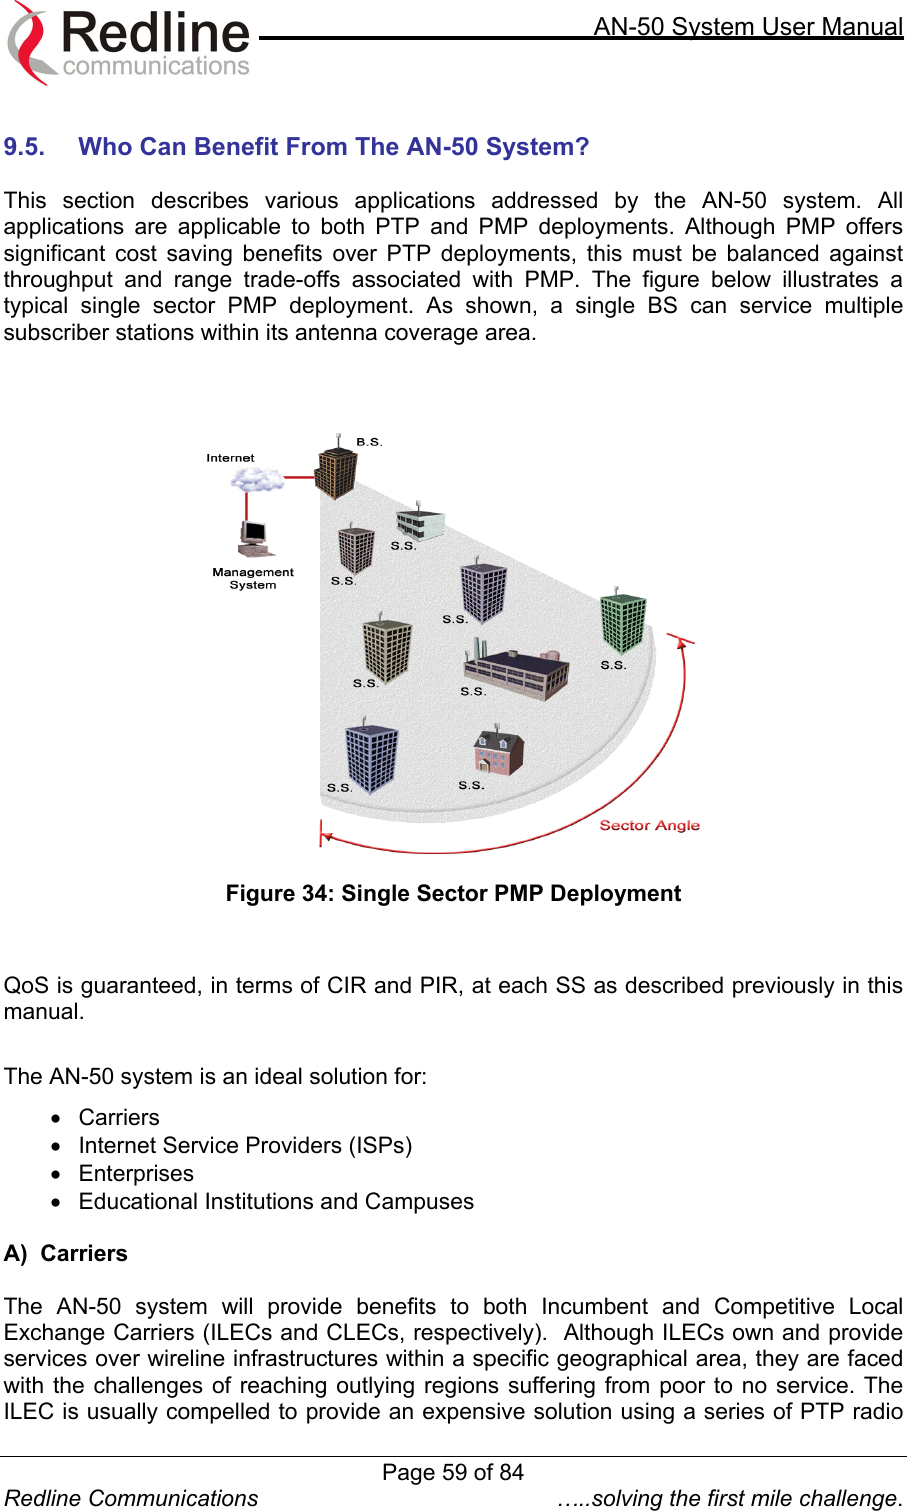     AN-50 System User Manual  Redline Communications  …..solving the first mile challenge.  9.5.  Who Can Benefit From The AN-50 System?  This section describes various applications addressed by the AN-50 system. All applications are applicable to both PTP and PMP deployments. Although PMP offers significant cost saving benefits over PTP deployments, this must be balanced against throughput and range trade-offs associated with PMP. The figure below illustrates a typical single sector PMP deployment. As shown, a single BS can service multiple subscriber stations within its antenna coverage area.           Figure 34: Single Sector PMP Deployment   QoS is guaranteed, in terms of CIR and PIR, at each SS as described previously in this manual.  The AN-50 system is an ideal solution for: •  Carriers  •  Internet Service Providers (ISPs) •  Enterprises •  Educational Institutions and Campuses    A)  Carriers  The AN-50 system will provide benefits to both Incumbent and Competitive Local Exchange Carriers (ILECs and CLECs, respectively).  Although ILECs own and provide services over wireline infrastructures within a specific geographical area, they are faced with the challenges of reaching outlying regions suffering from poor to no service. The ILEC is usually compelled to provide an expensive solution using a series of PTP radio Page 59 of 84